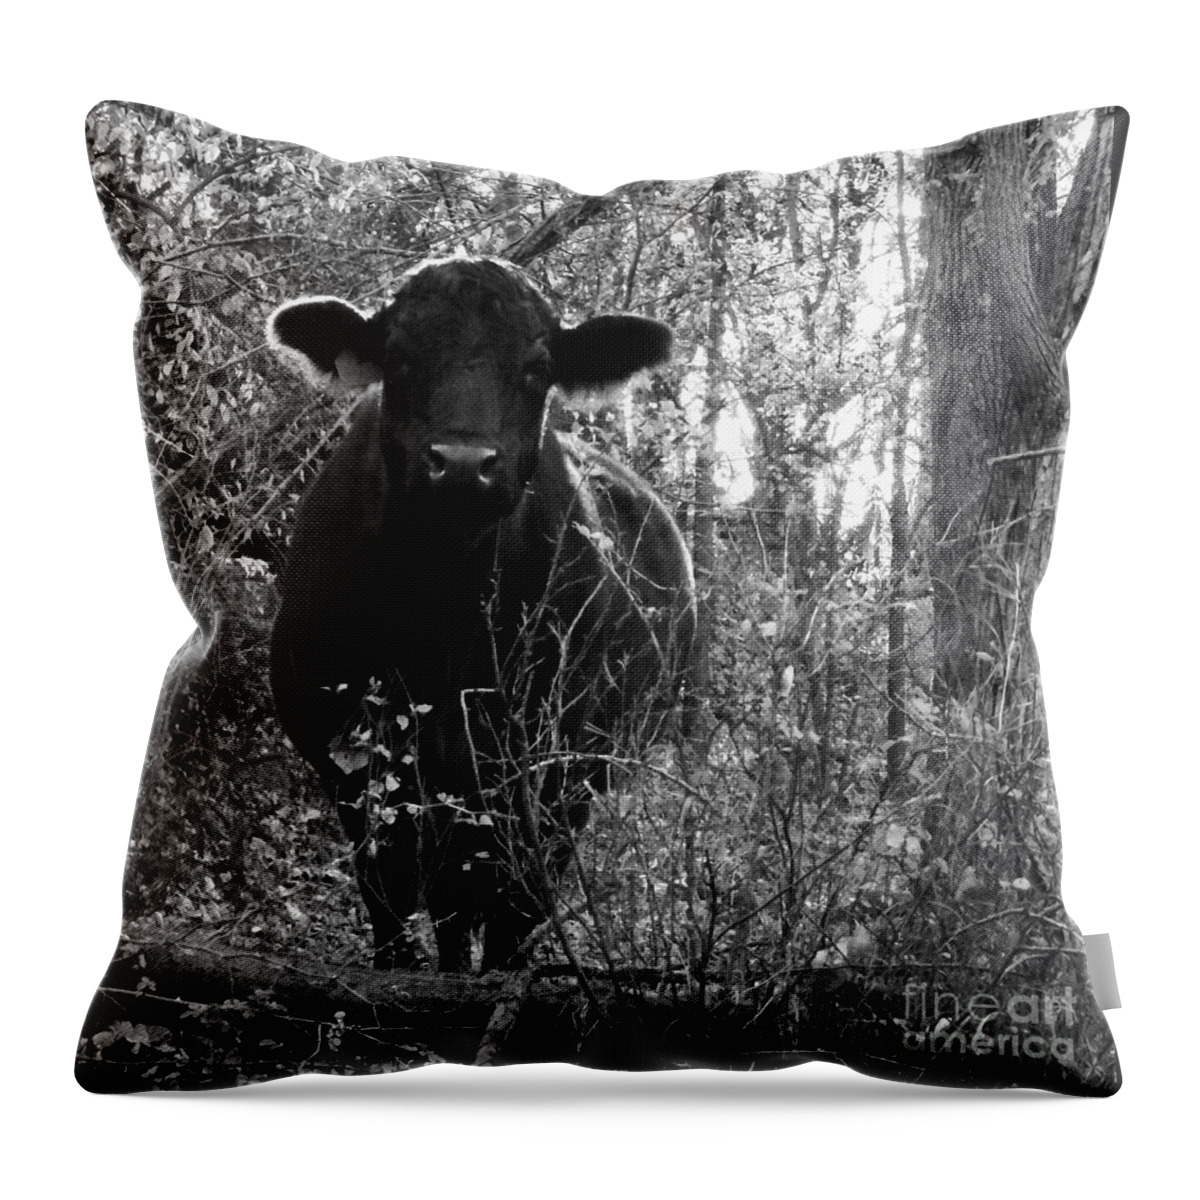 Cow Pictures Throw Pillow featuring the photograph Quiet Companion by J L Zarek